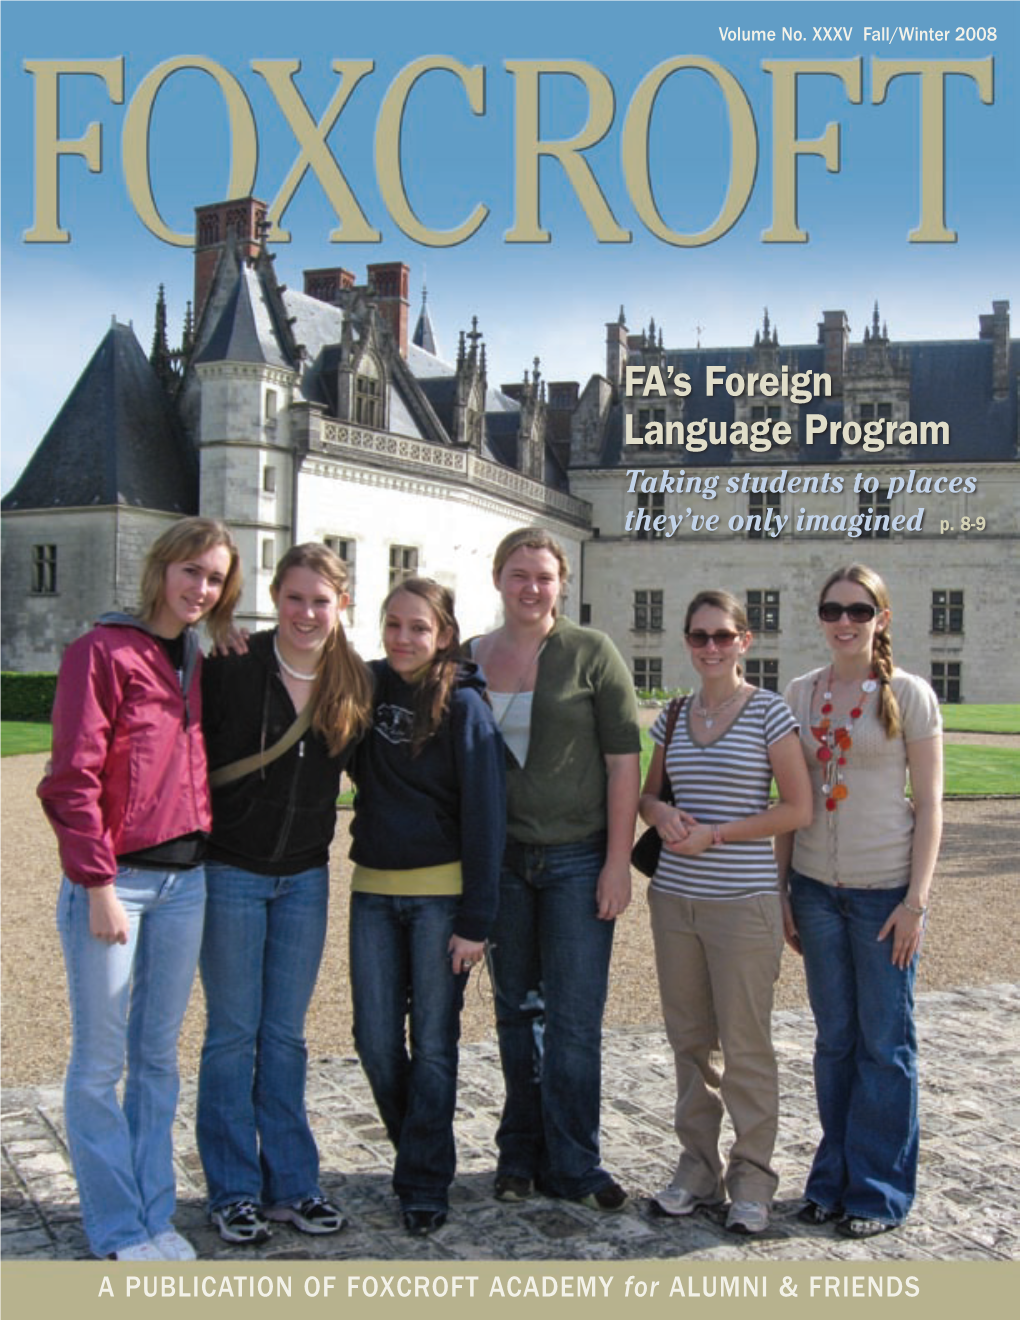 Fall/Winter 2008 Same Name, Visit FA’S New Website Great New Look! Come See the New and Improved Foxcroft Academy Website